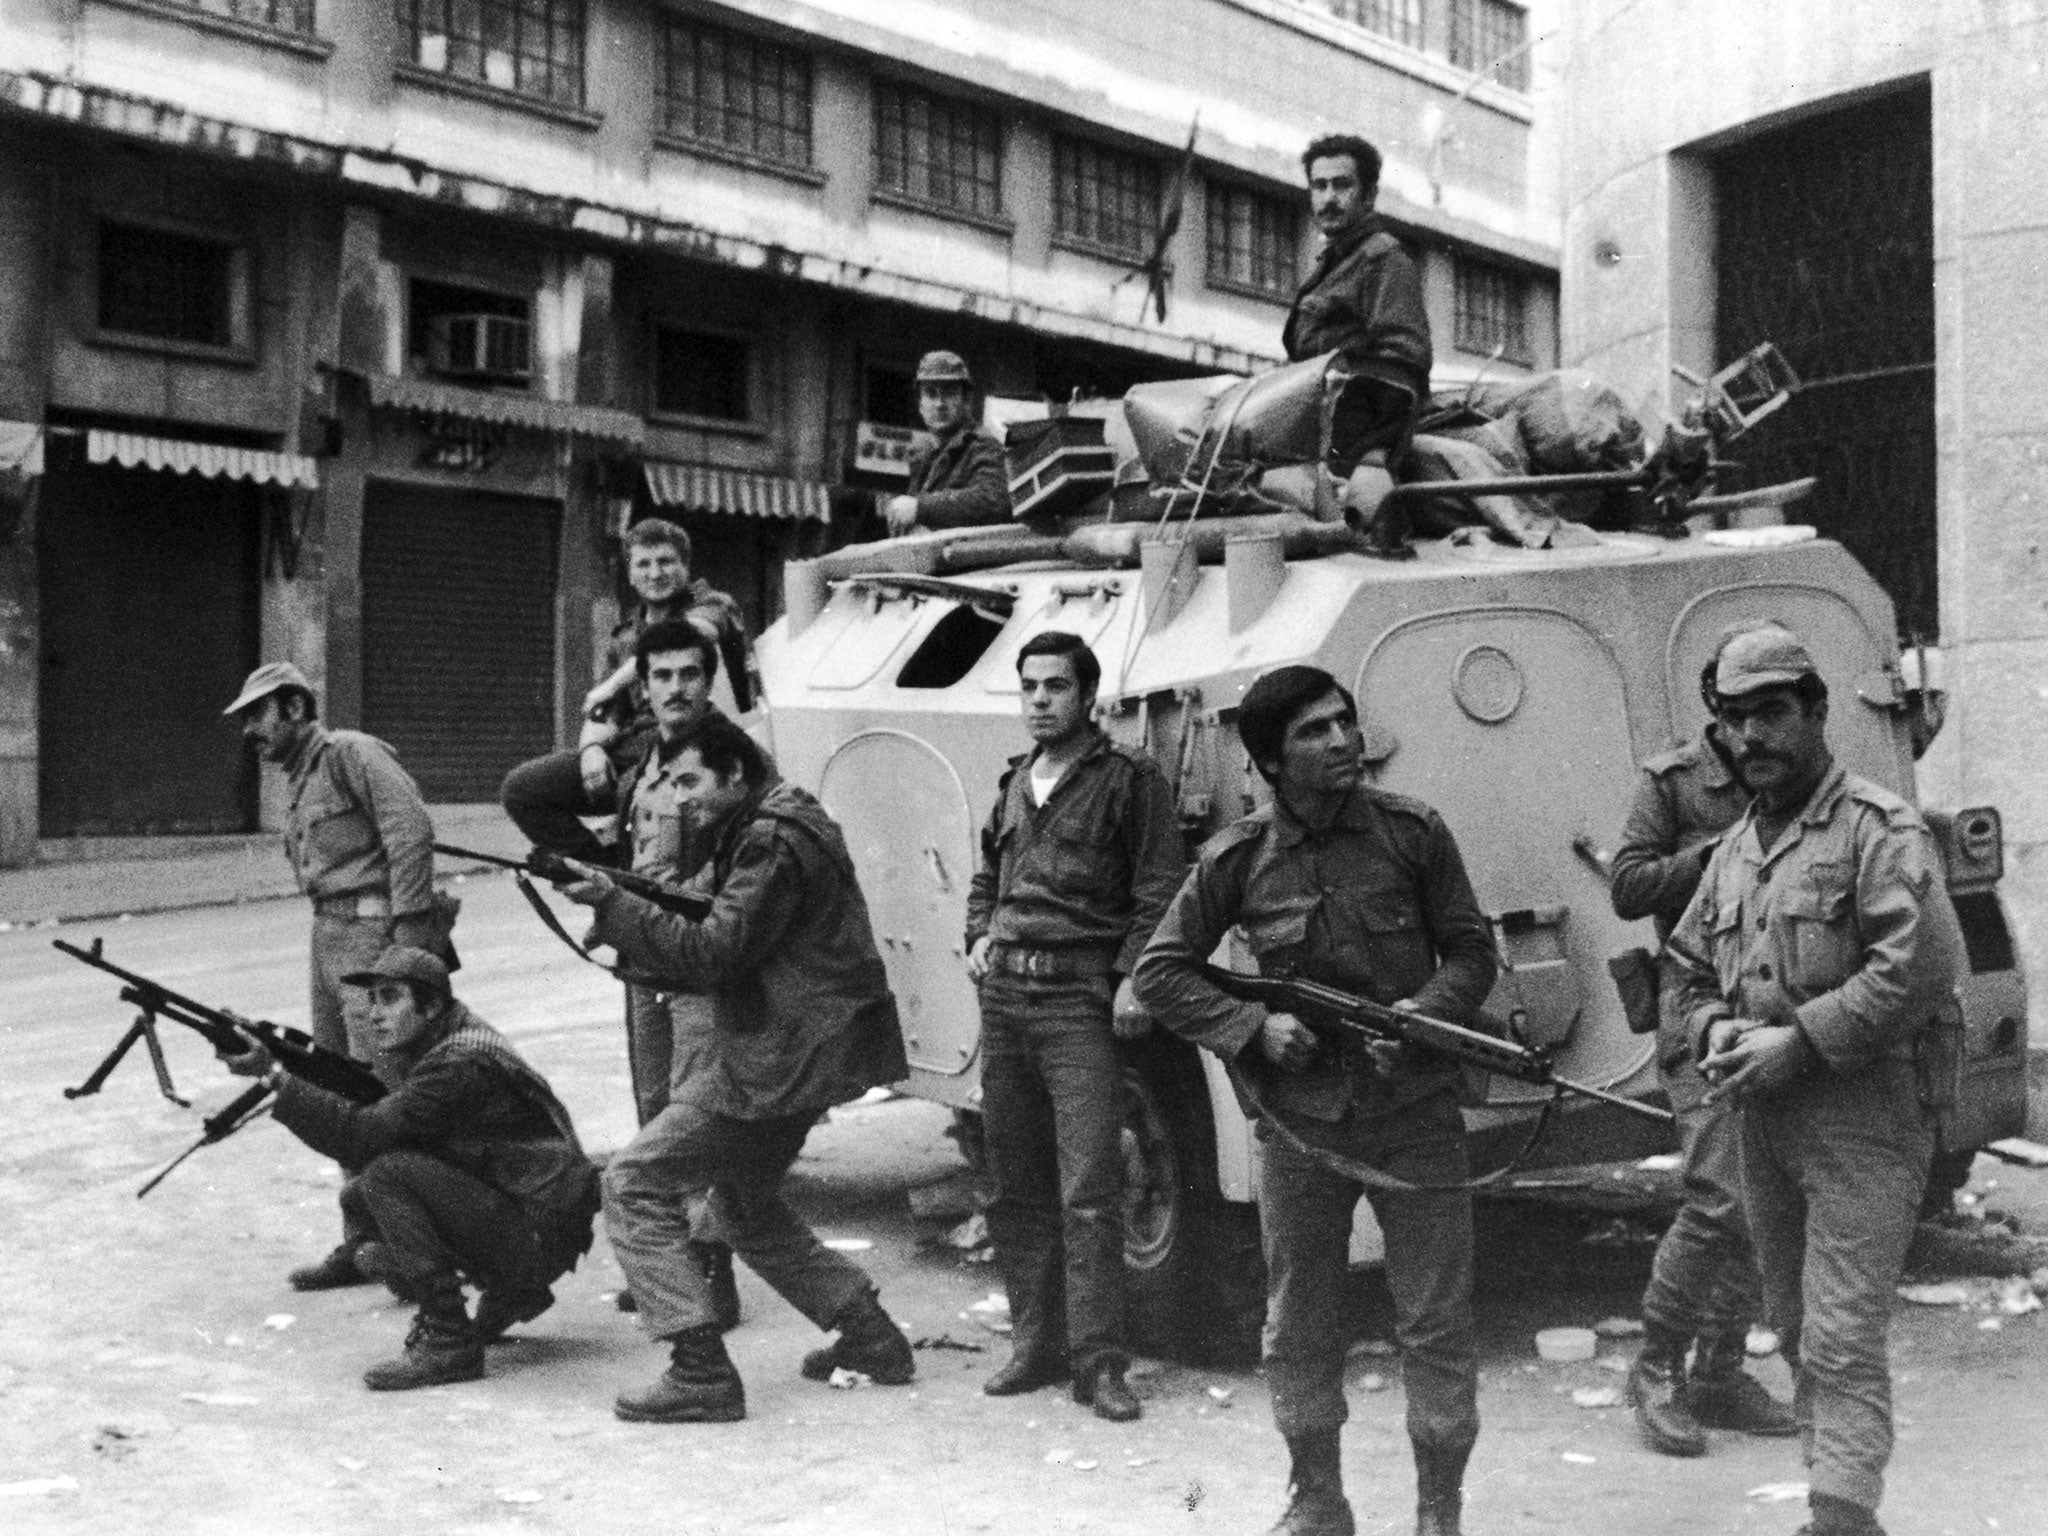 Security forces in Beirut during the Civil War in Lebanon, December 1975